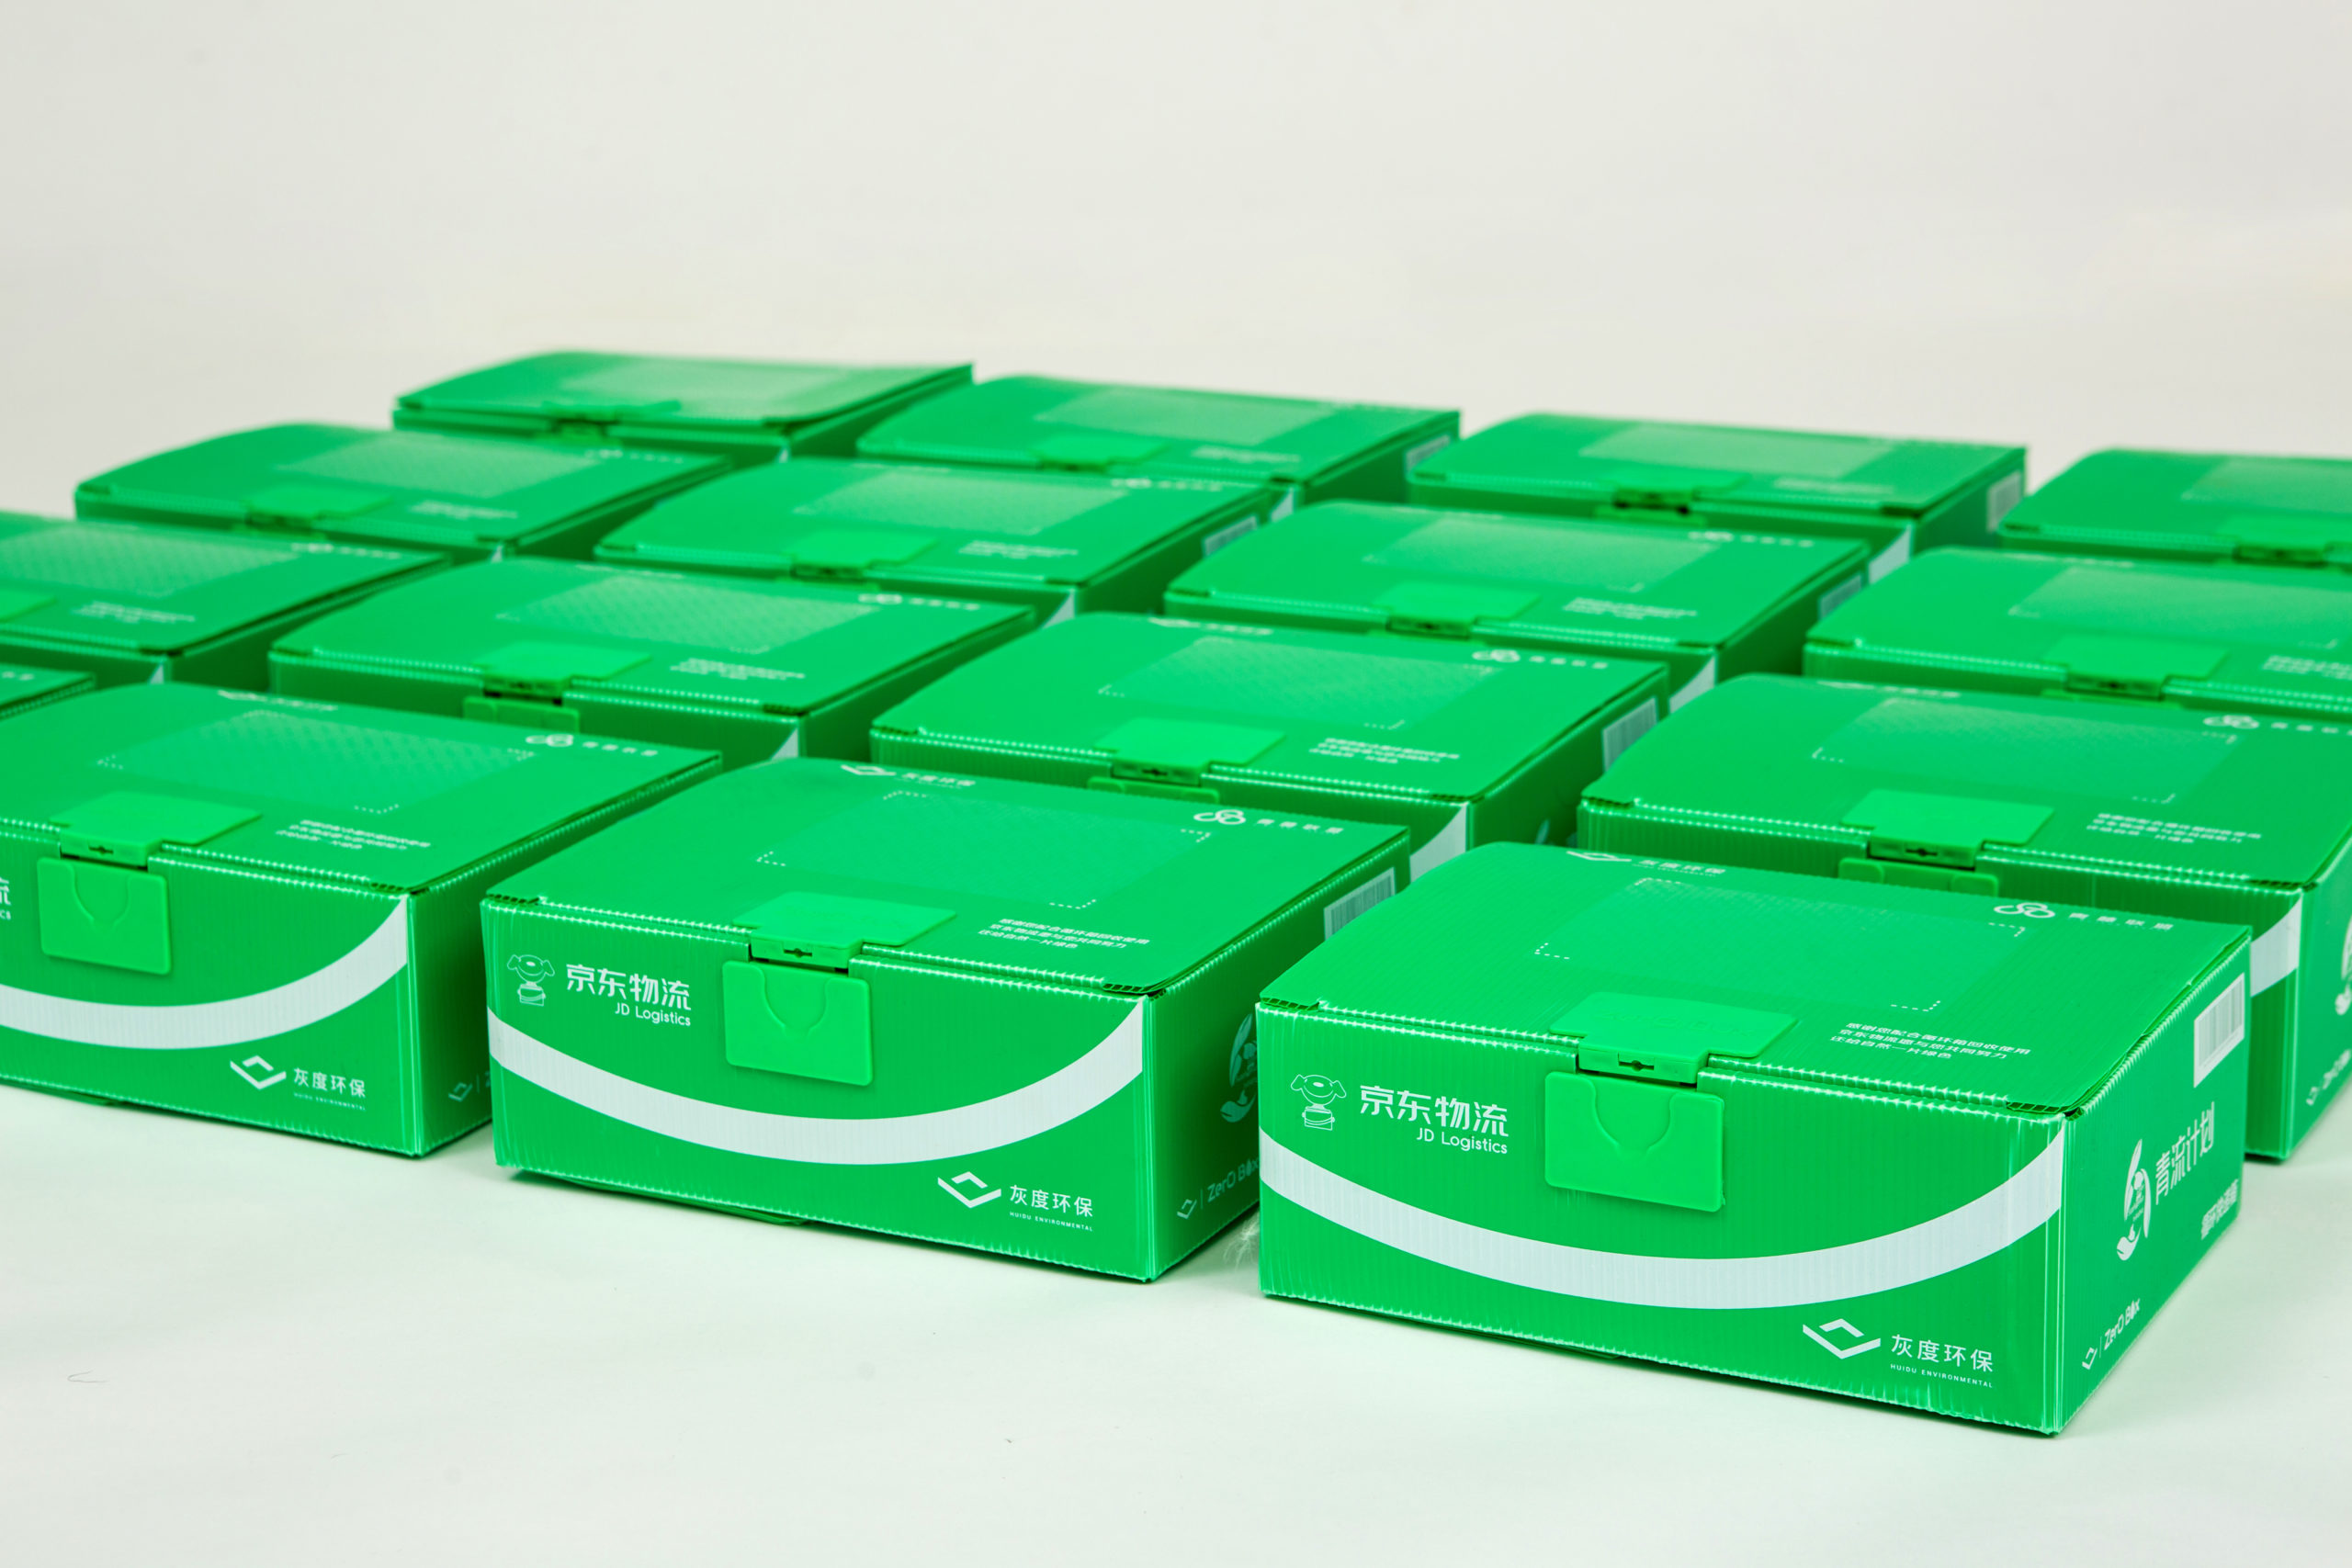 JD ESG: Green Packaging Saves 10 Billion Disposable Boxes